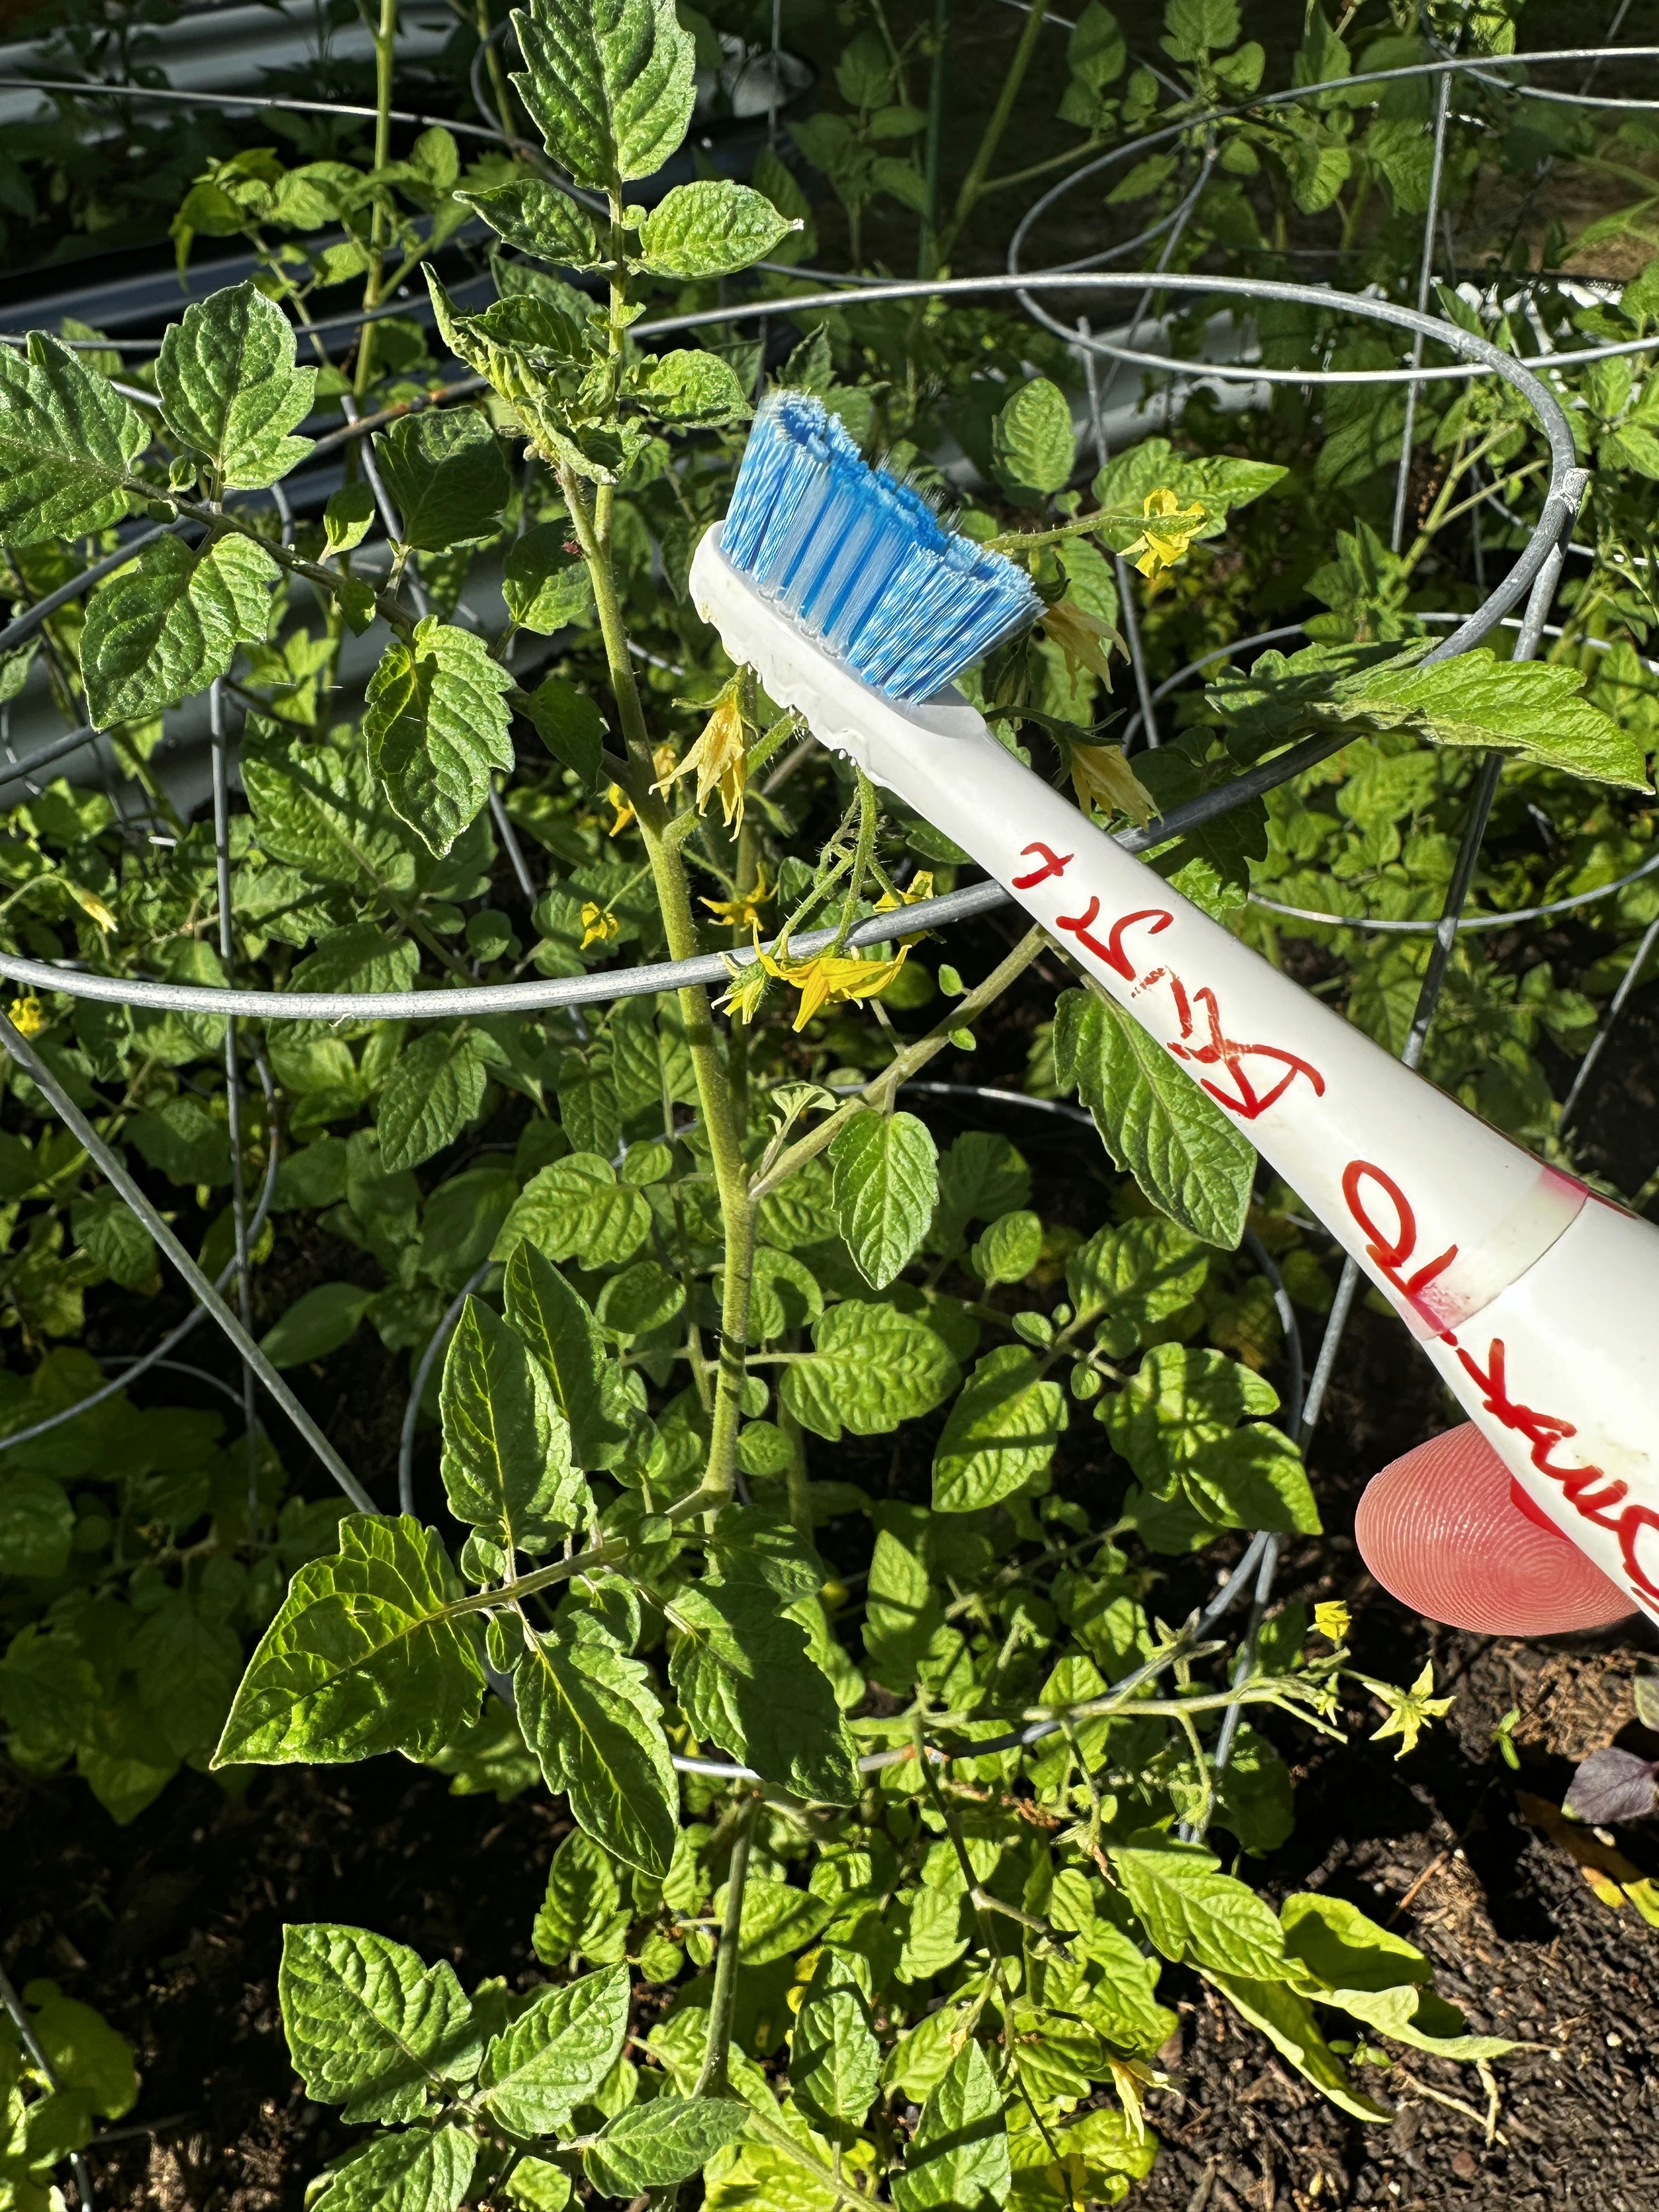 A picture of the electric toothbrush being used on a tomoato plant flower